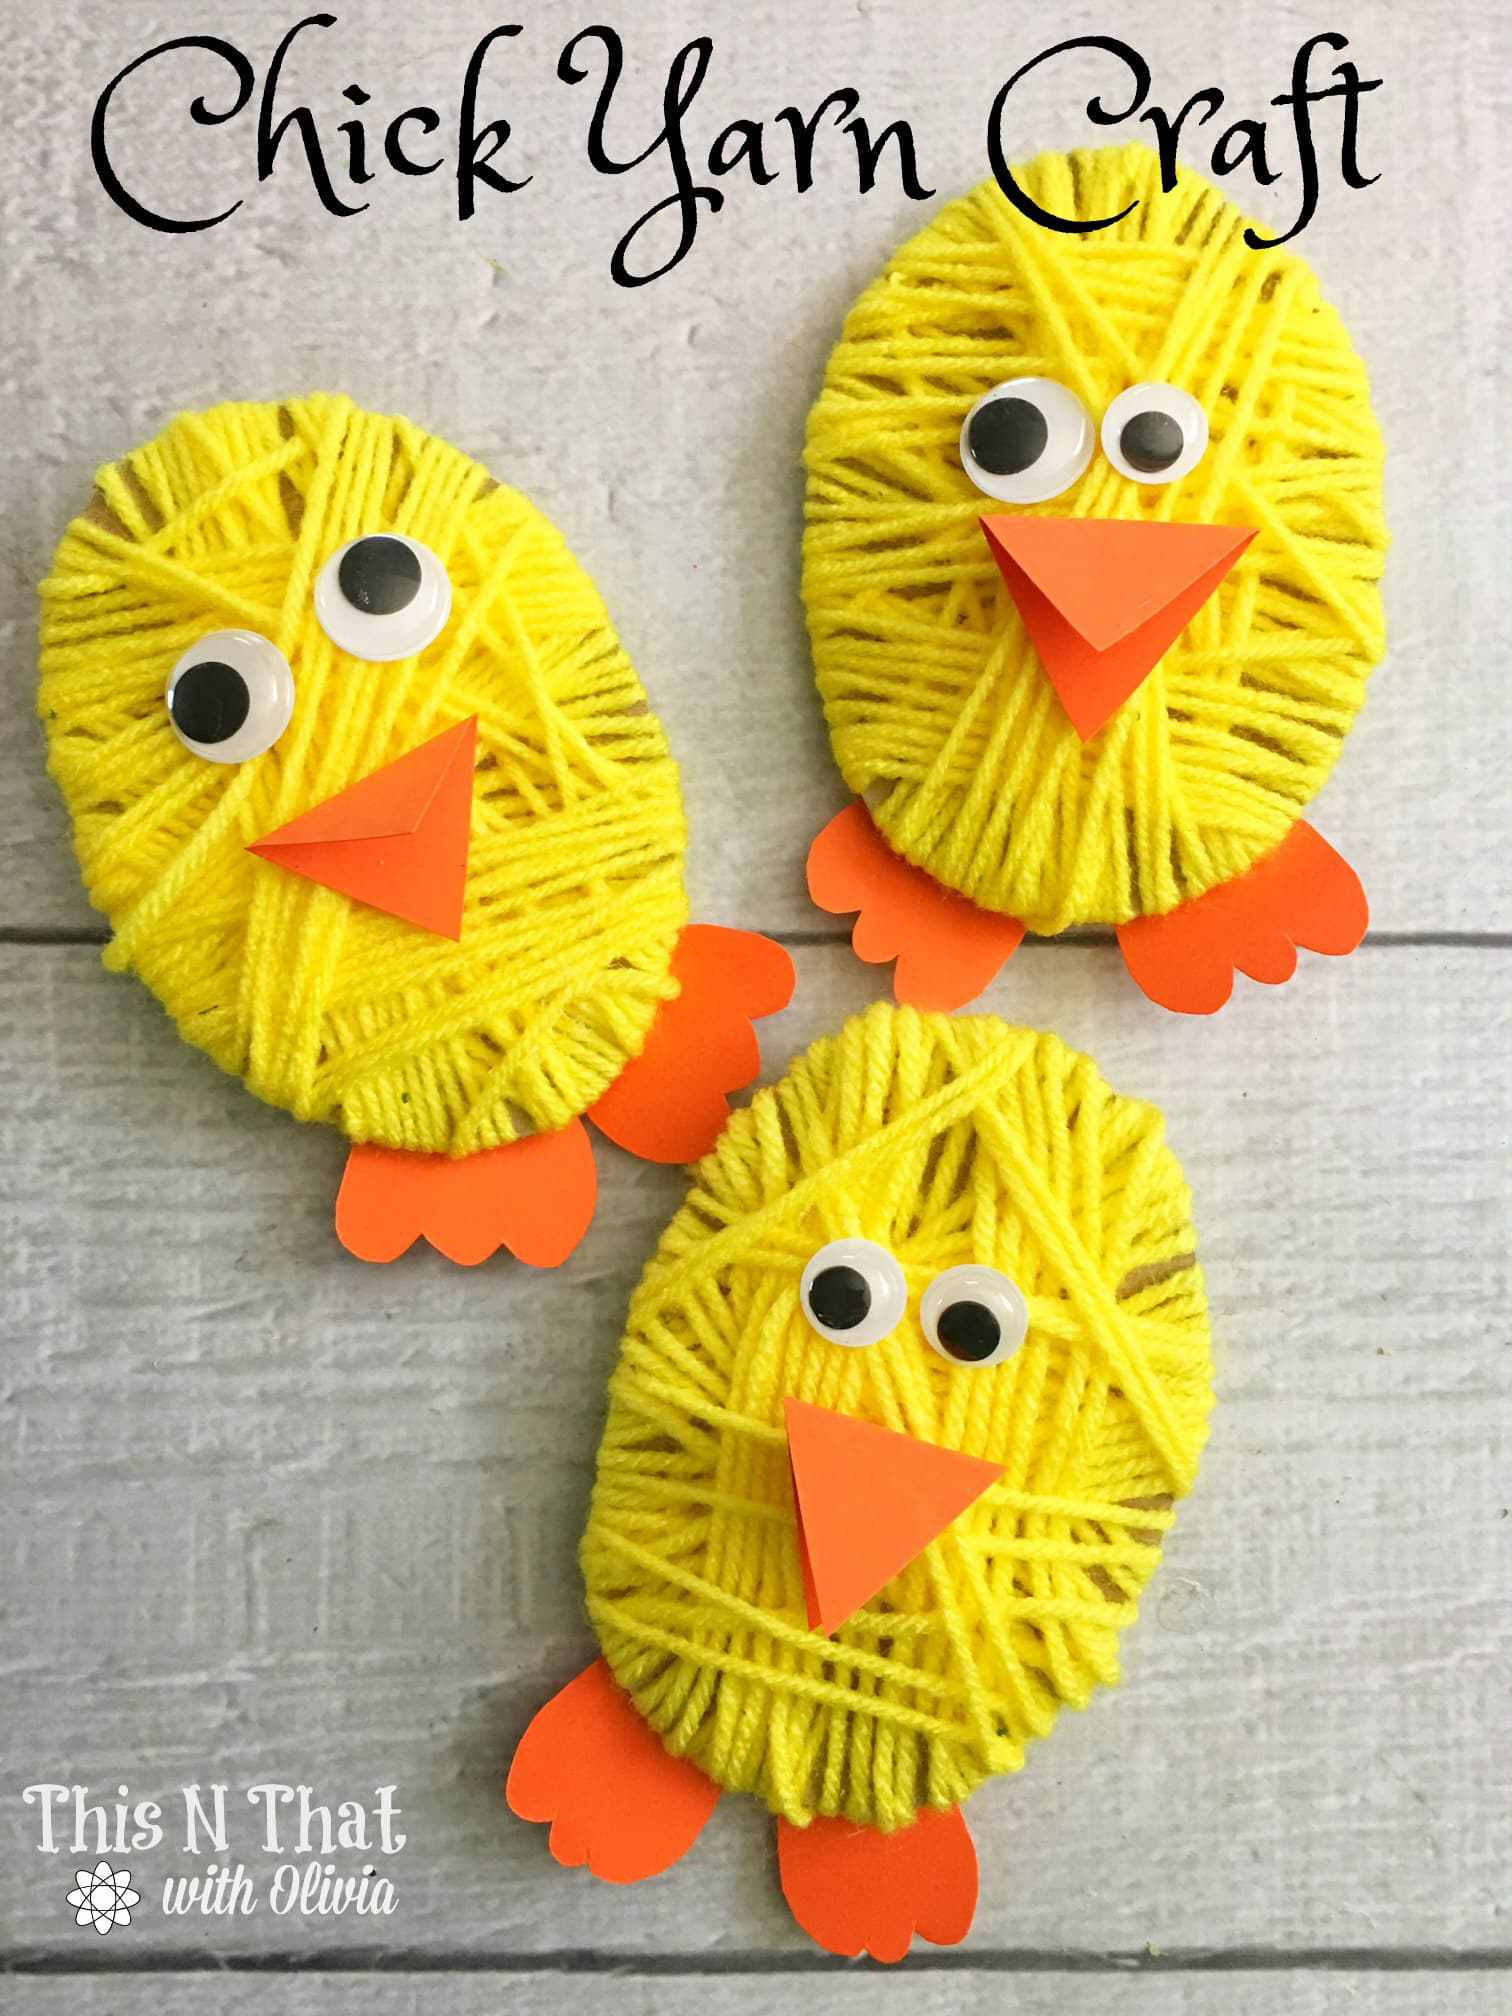 Easter Crafts For Elementary Students
 Over 33 Easter Craft Ideas for Kids to Make Simple Cute